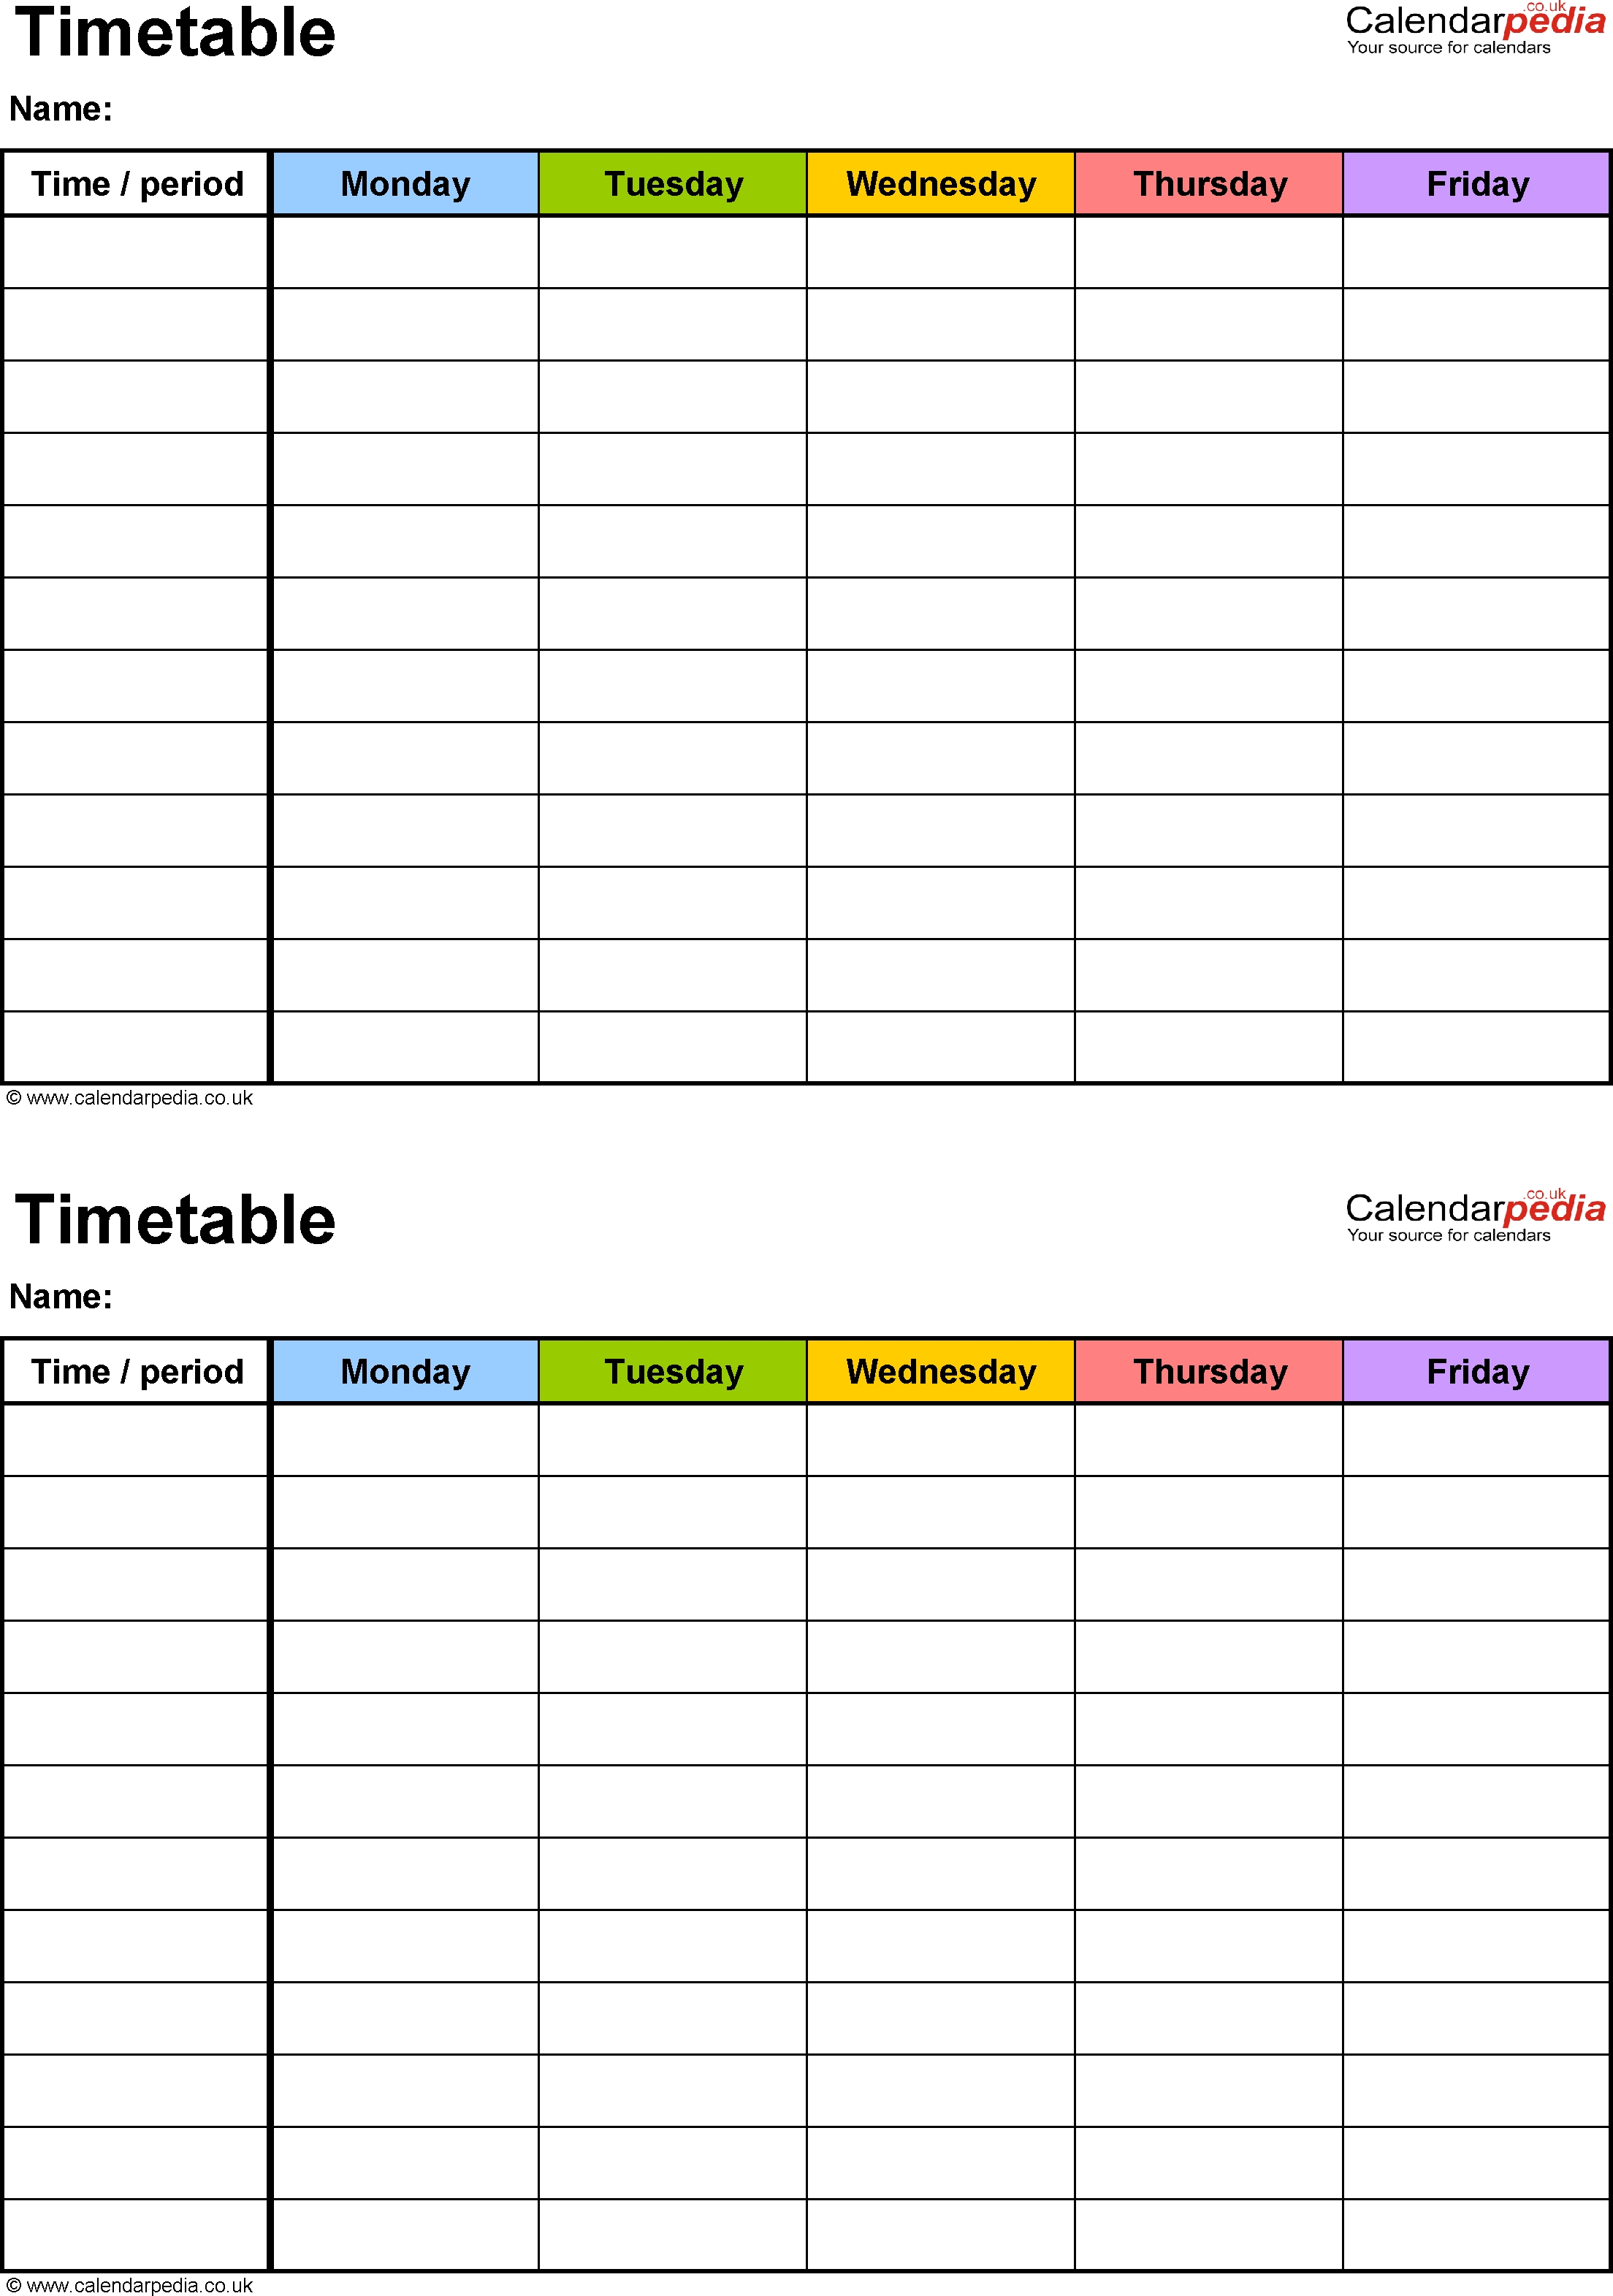 Excel Timetable Template 6: 2 A5 Timetables On One Page, Portrait in 5 Day Monthly Calendar Printable Free